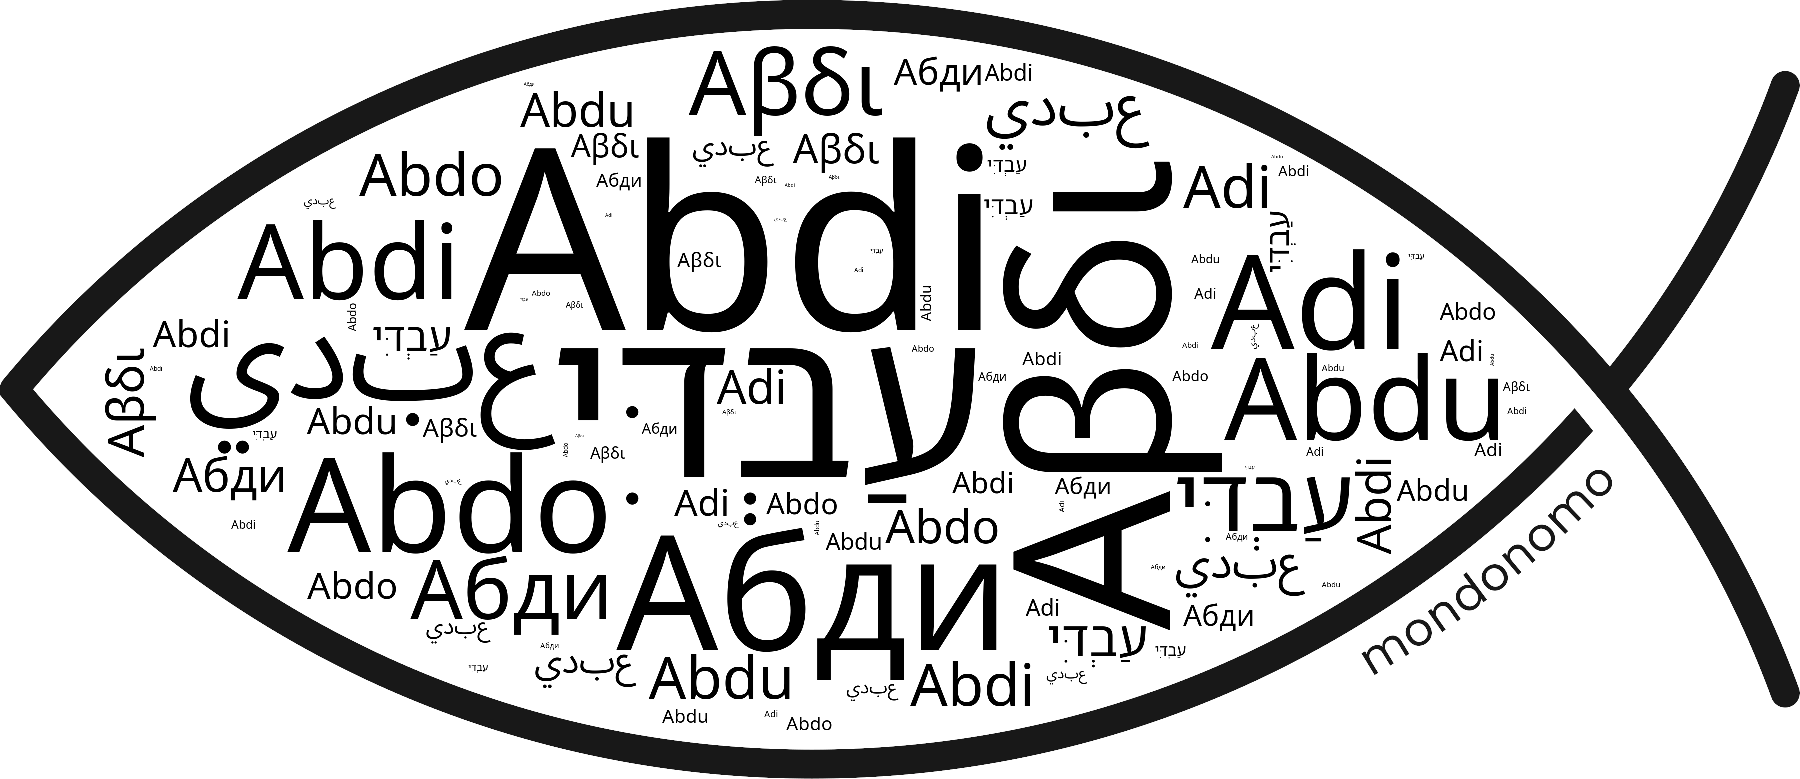 Name Abdi in the world's Bibles